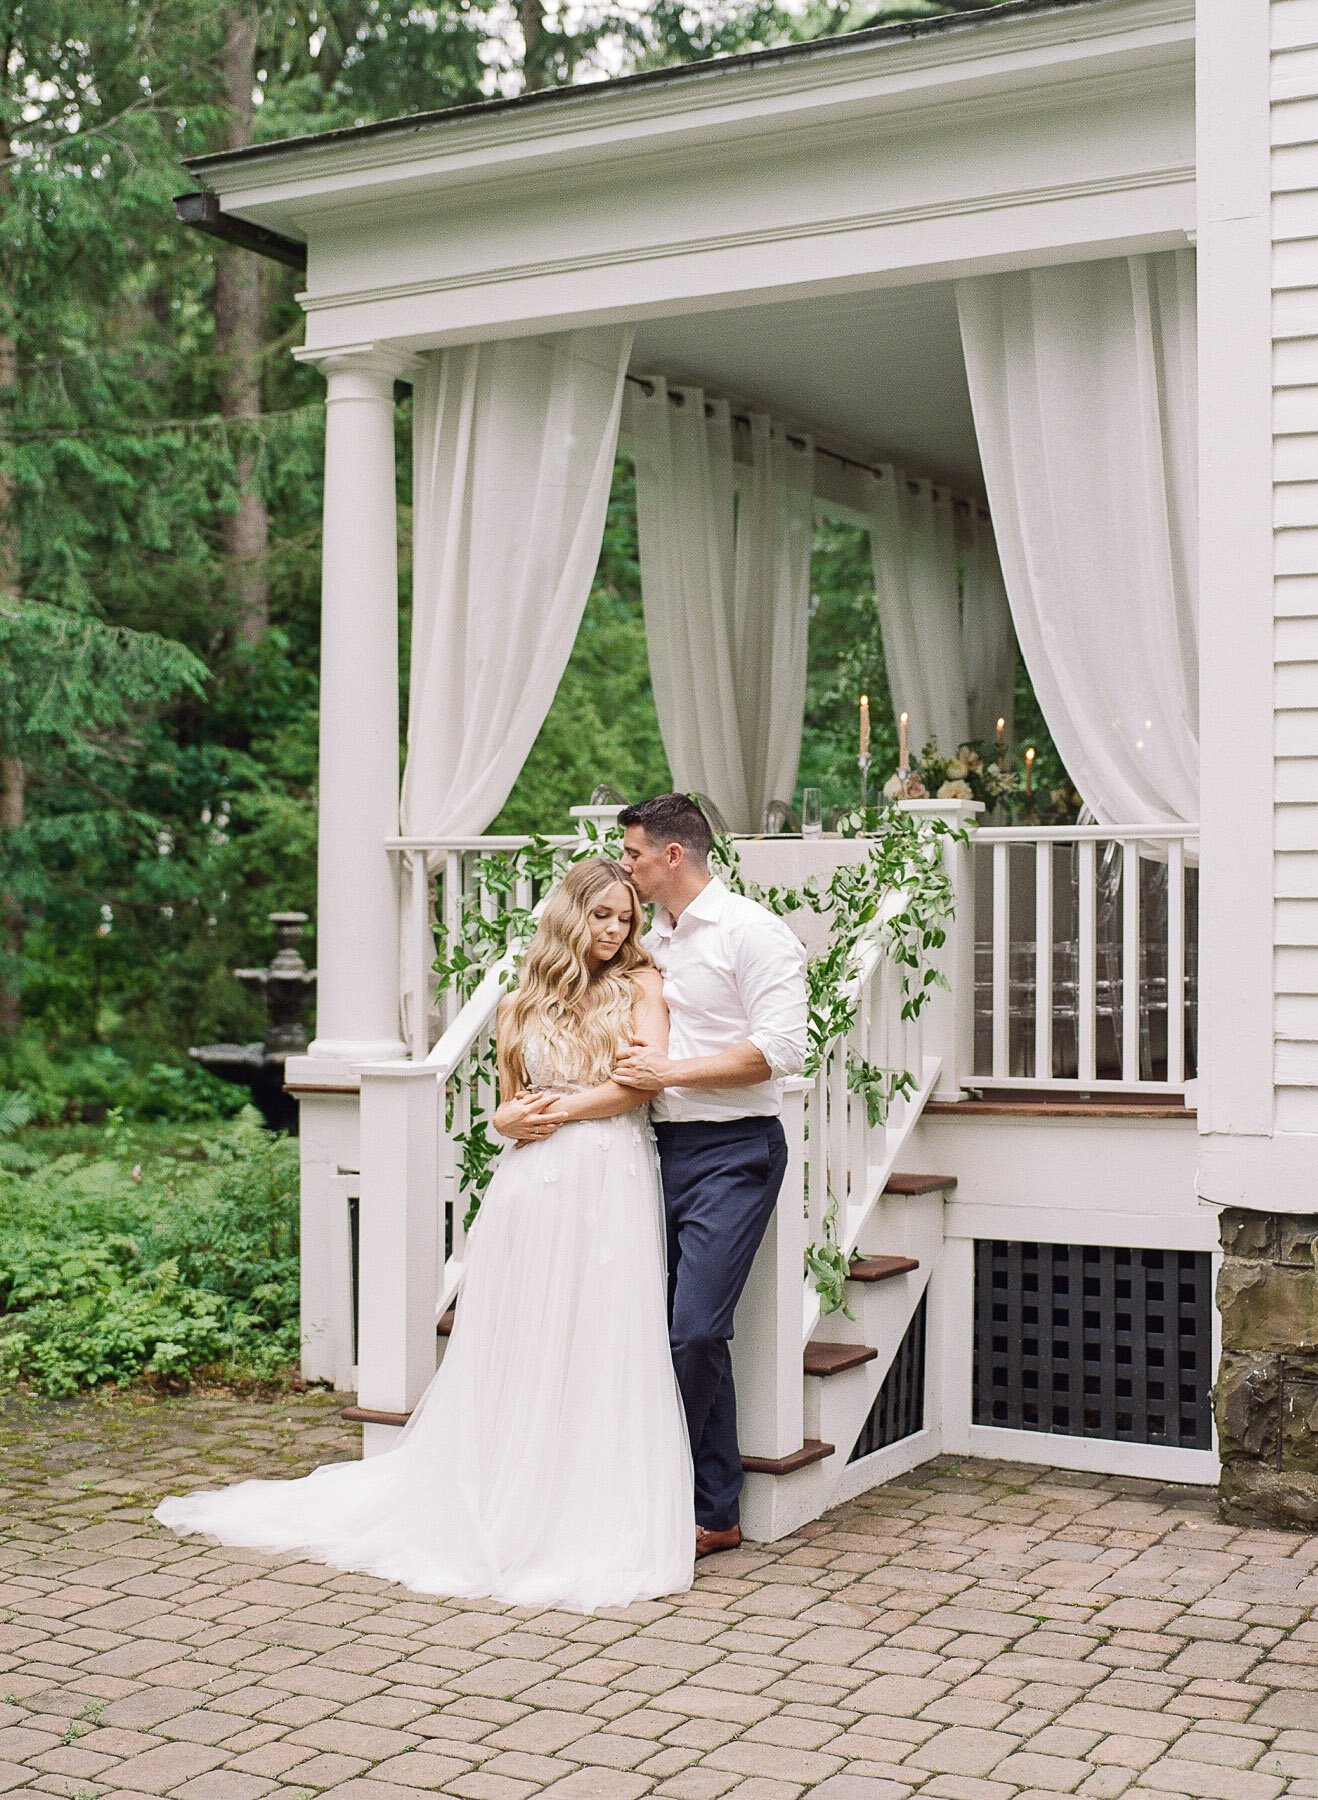 Kelly Strong Intimate Wedding in Upstate NY by Michelle Lange Photography - 49.JPG